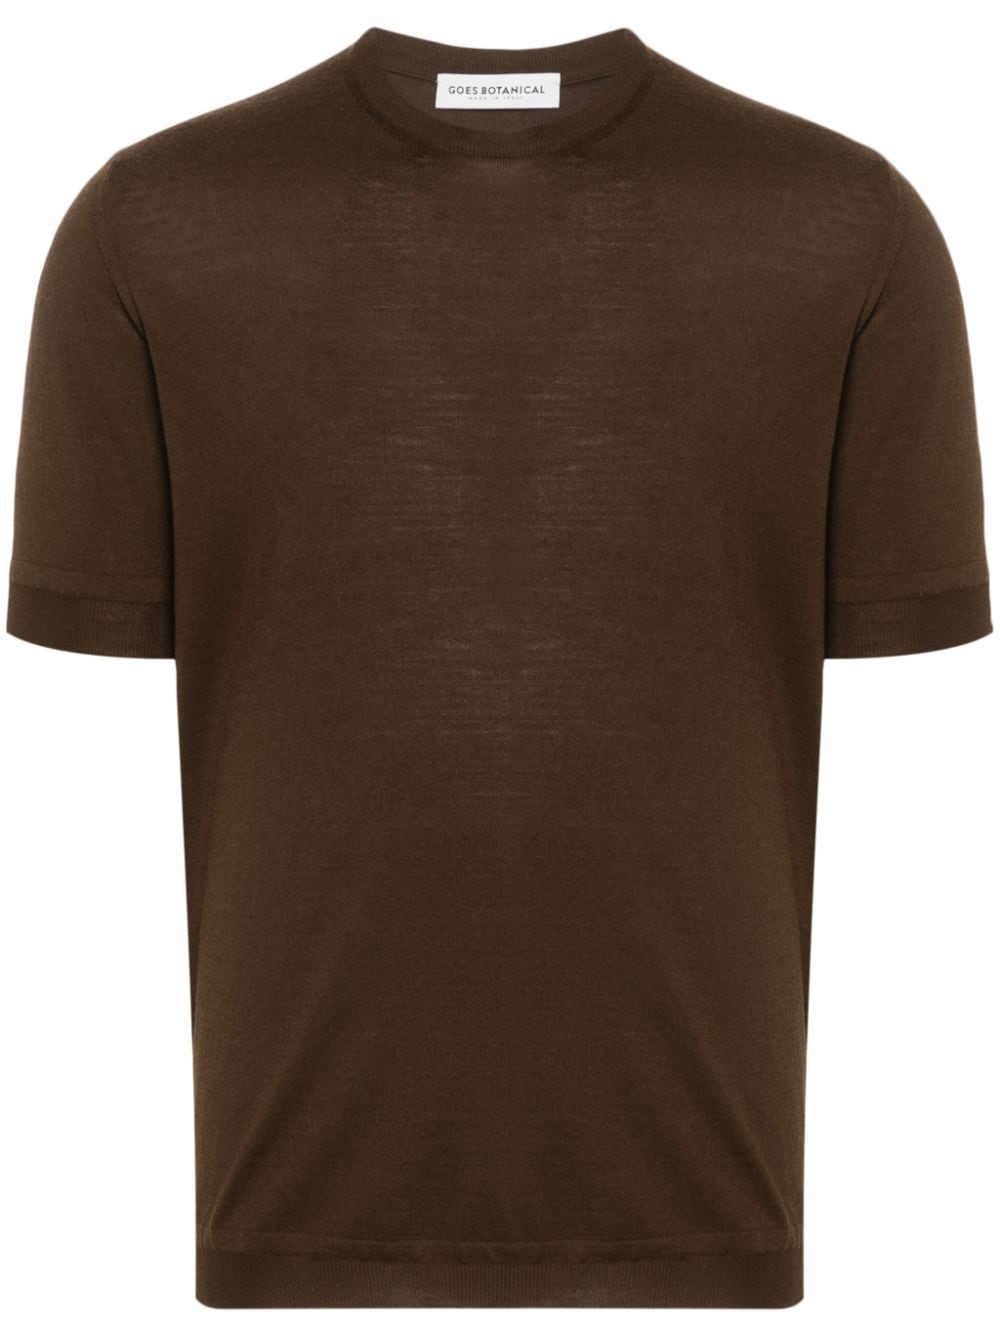 Shop Goes Botanical Knitted Merino T-shirt In Brown